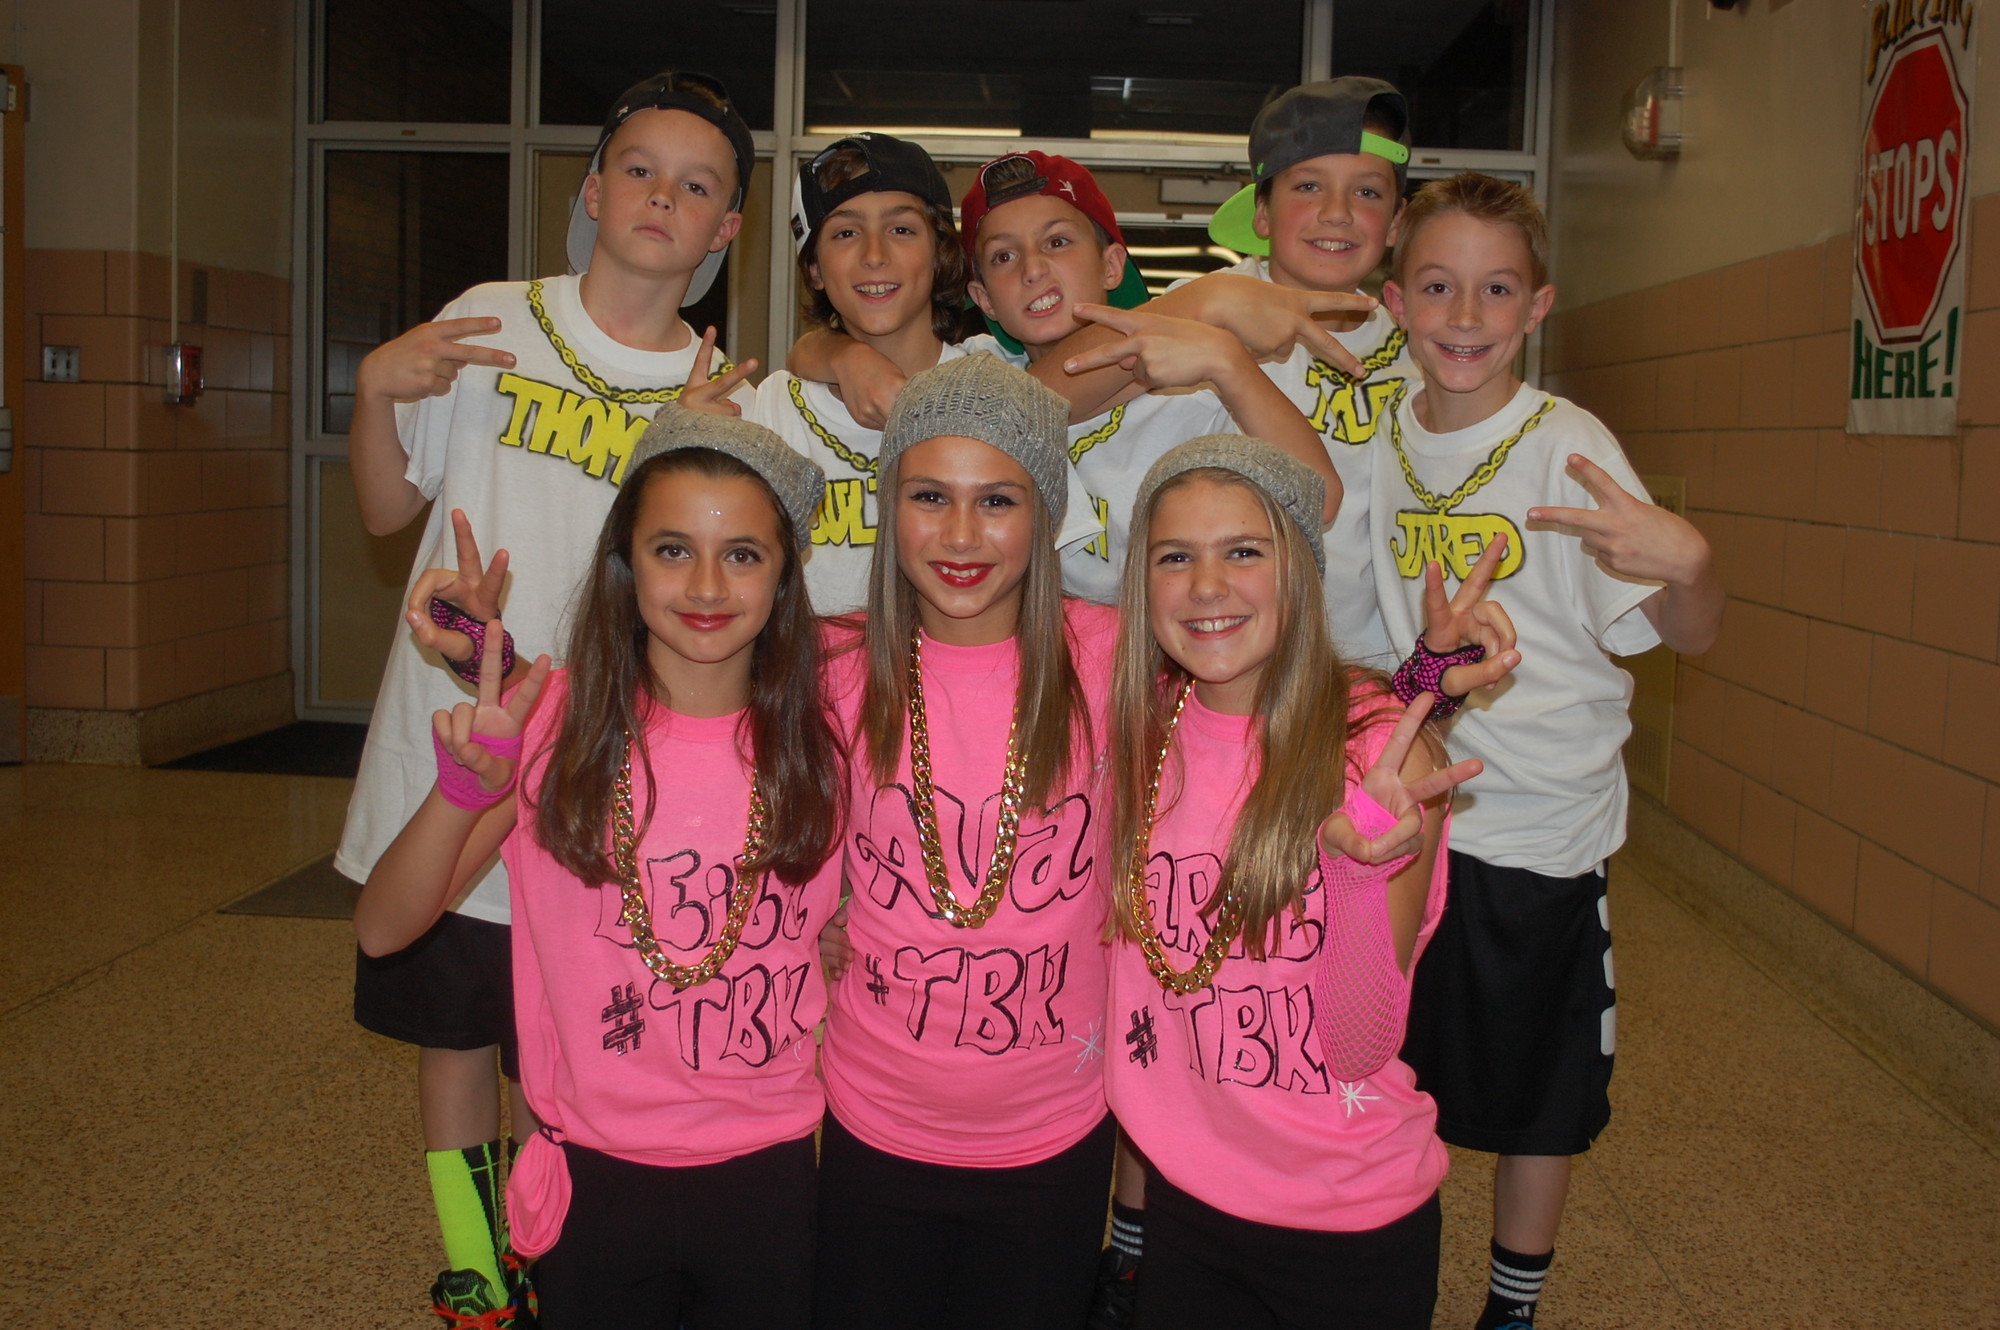 The #throwbackkids did a 1980s-inspired dance routine at the Seaford Middle School talent show last Thursday night.